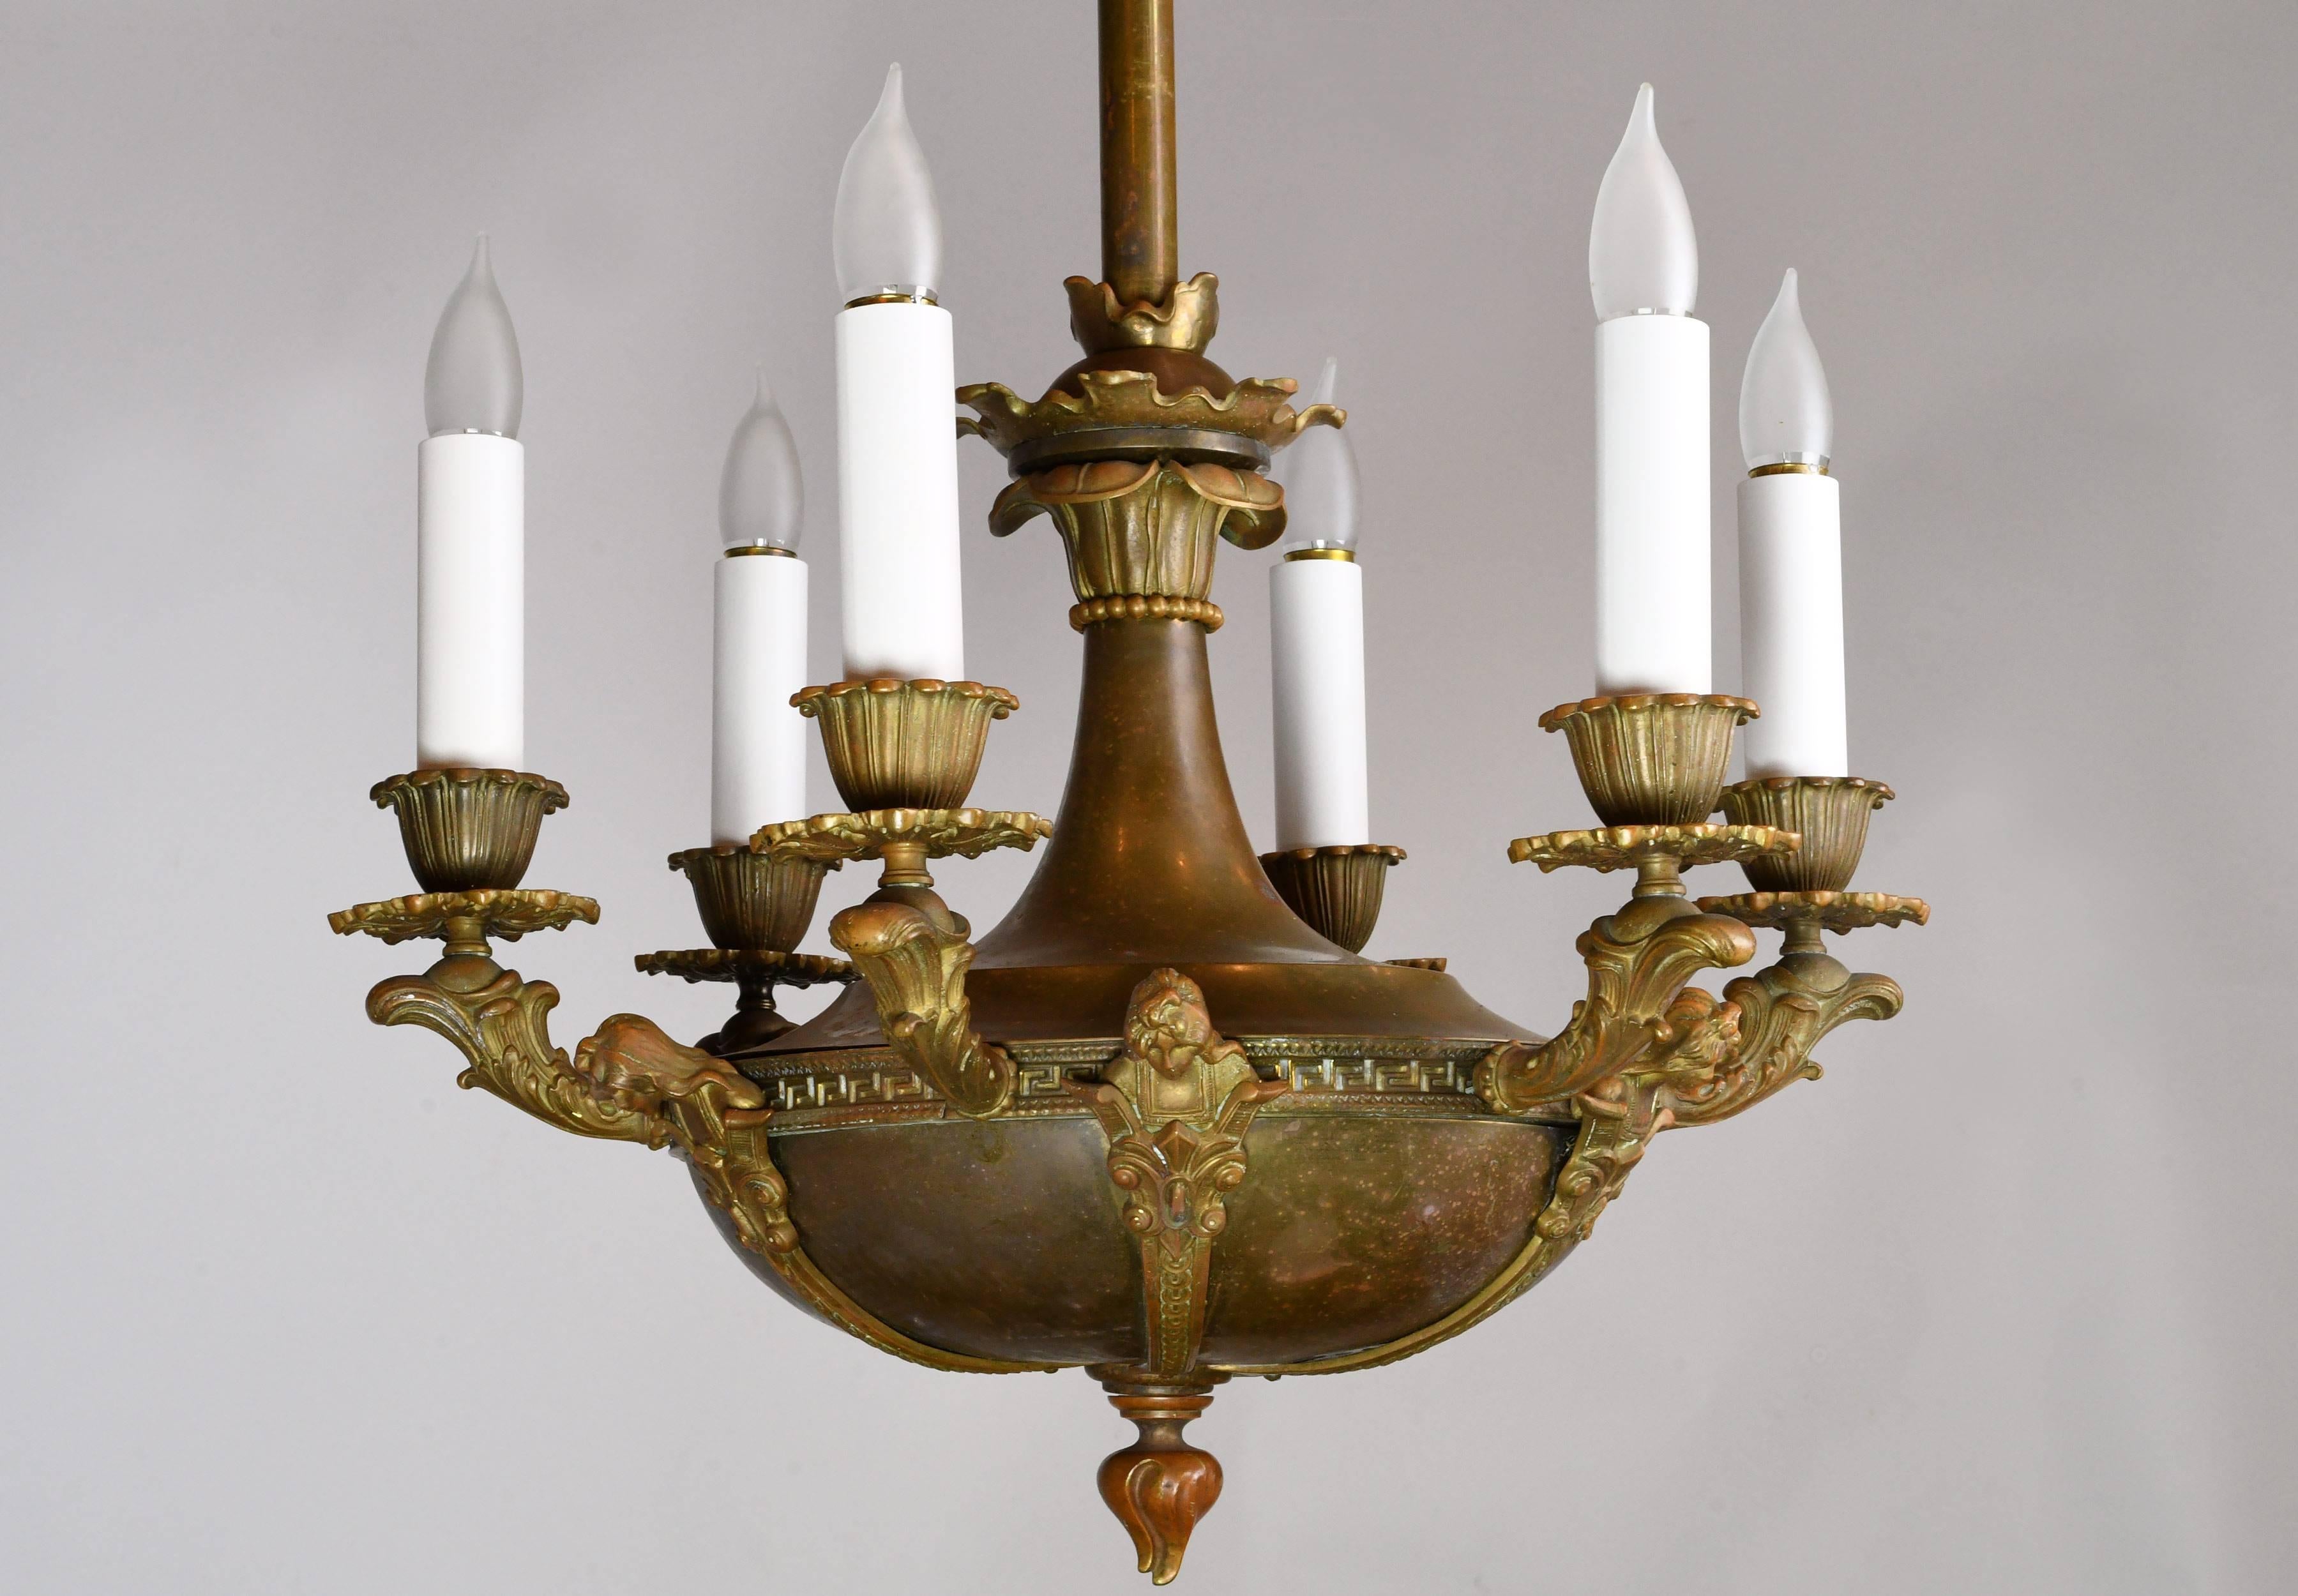 Crafted out of bronze, this six candle fixture has aged beautifully and has small amounts of varying colored patina throughout. The candles of this intricate chandelier are interspersed with human figures, reminiscent of figureheads on a mighty